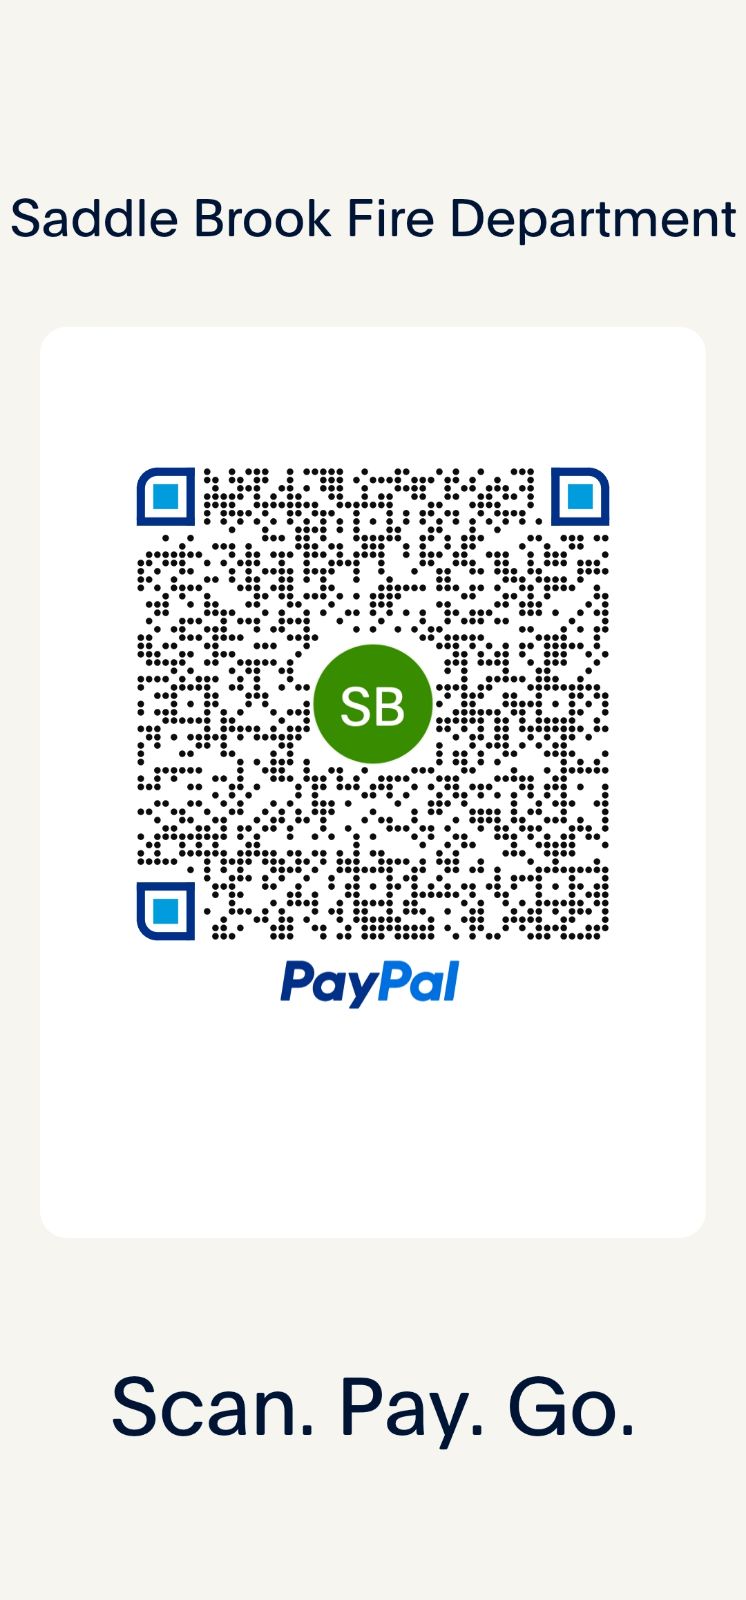 Saddle Brook Fire Department Donation QR Code - PayPal